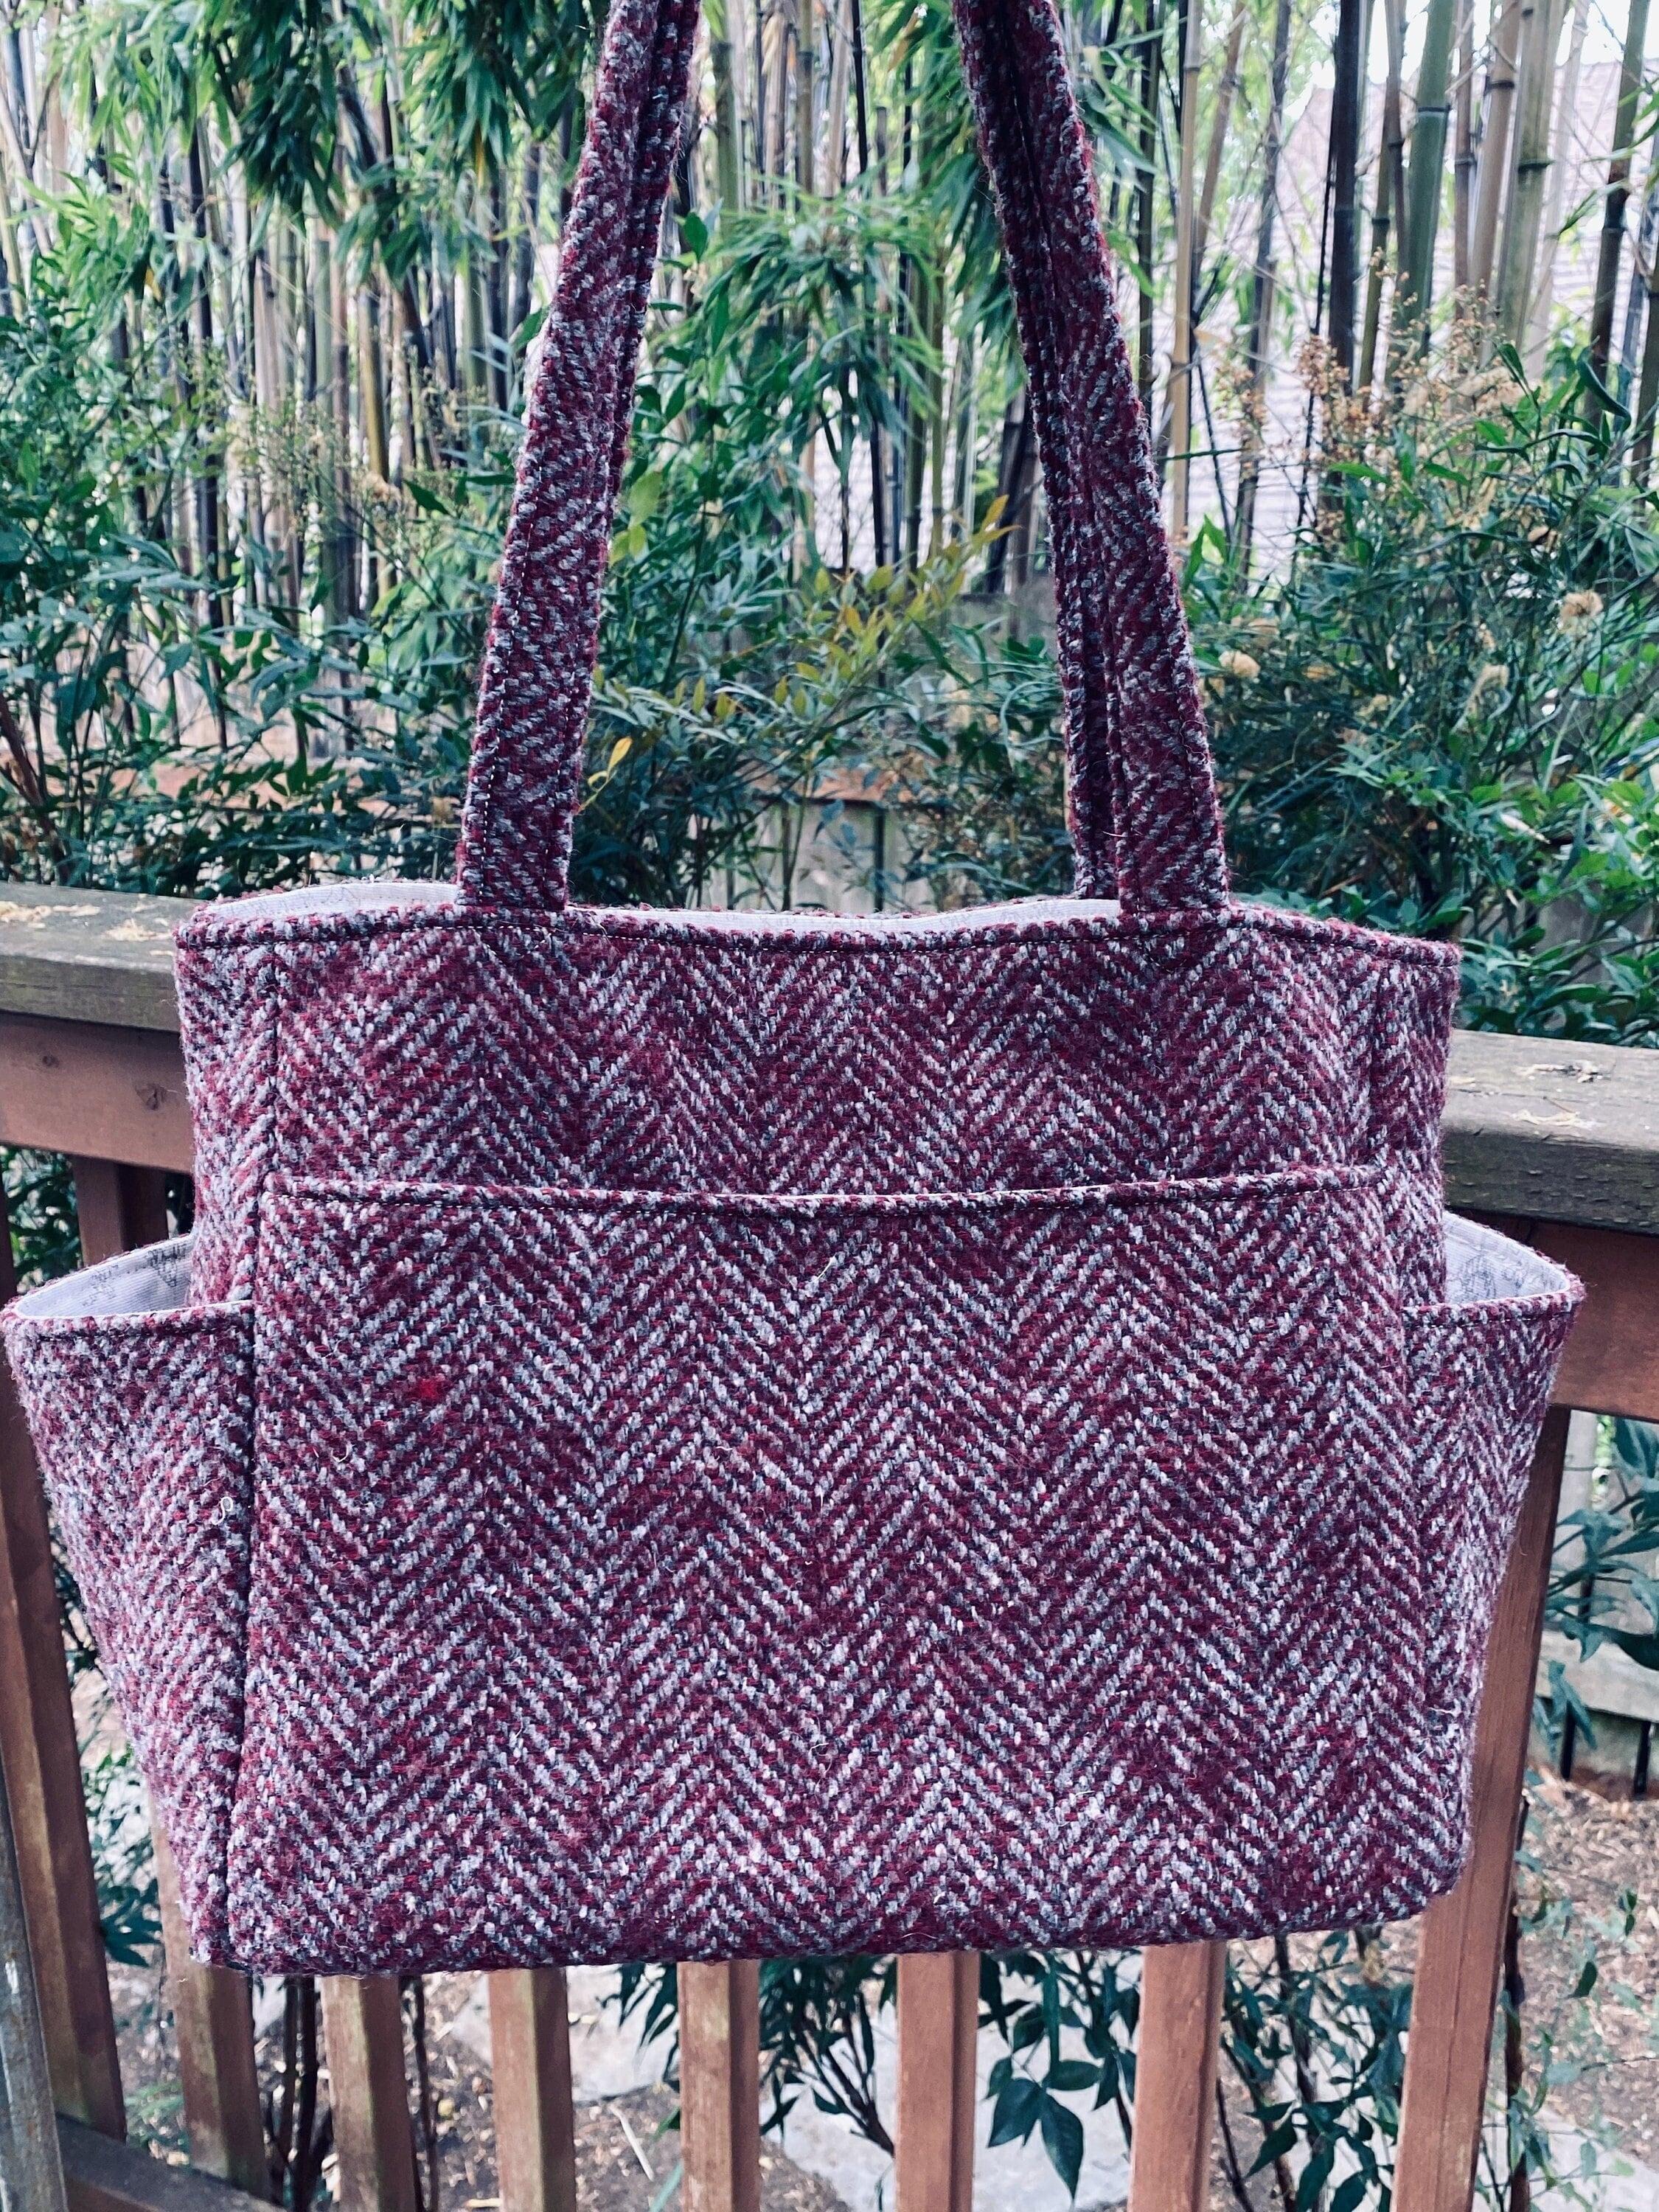 Katrina#2144, Wool Blend Tweed Knitting Bag With Pockets, Self Standing Large Project Bag, Sweater Size Burgundy Tote